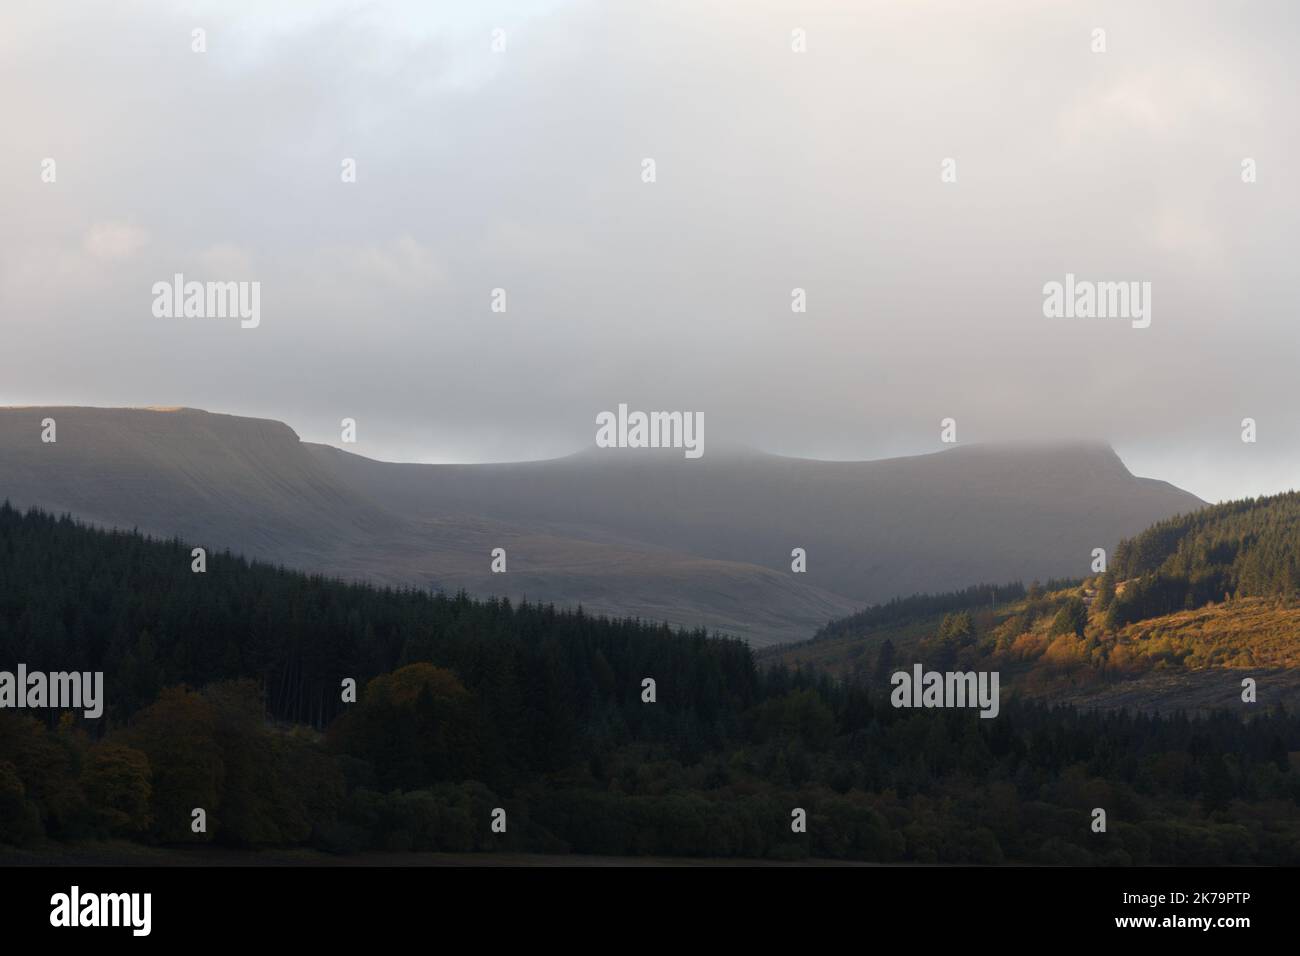 Pentwyn reservoir, Merthyr Tydfil, South Wales, UK.  17 October '22.  UK weather: Clouds over the Brecon Beacons.  Credit: Andrew Bartlett/Alamy Live News. Stock Photo